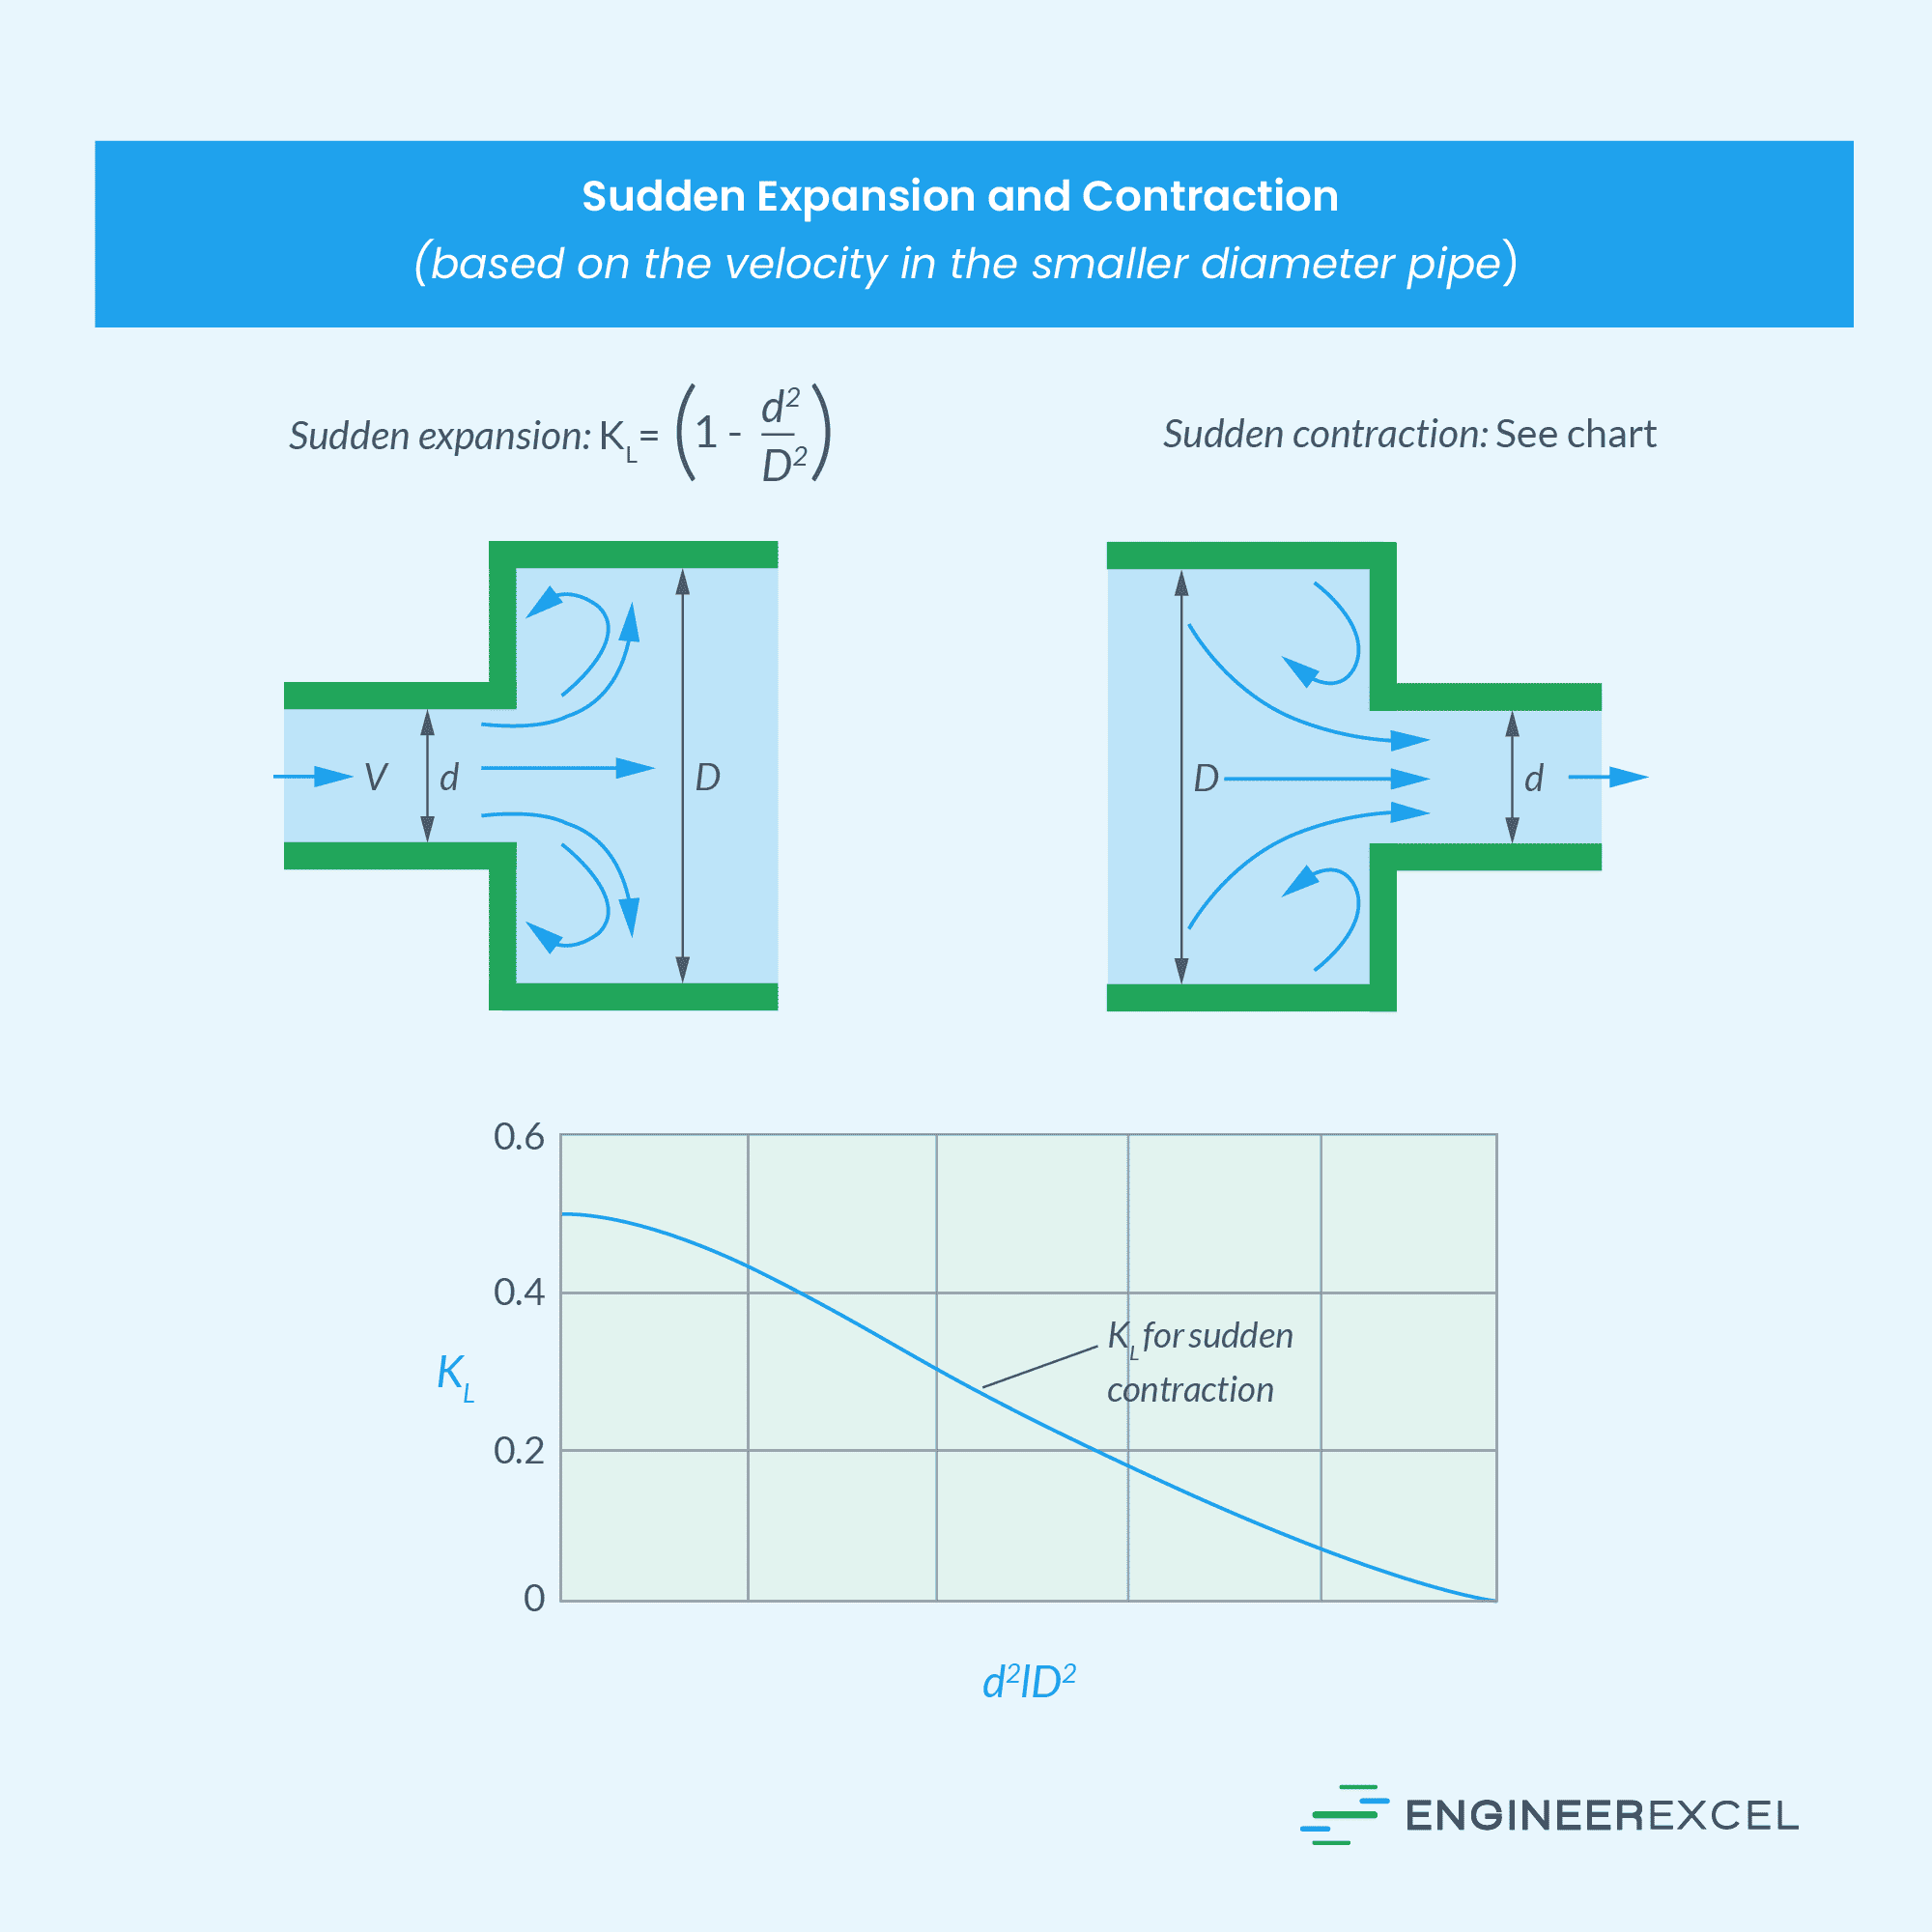 Loss coefficient of sudden contraction